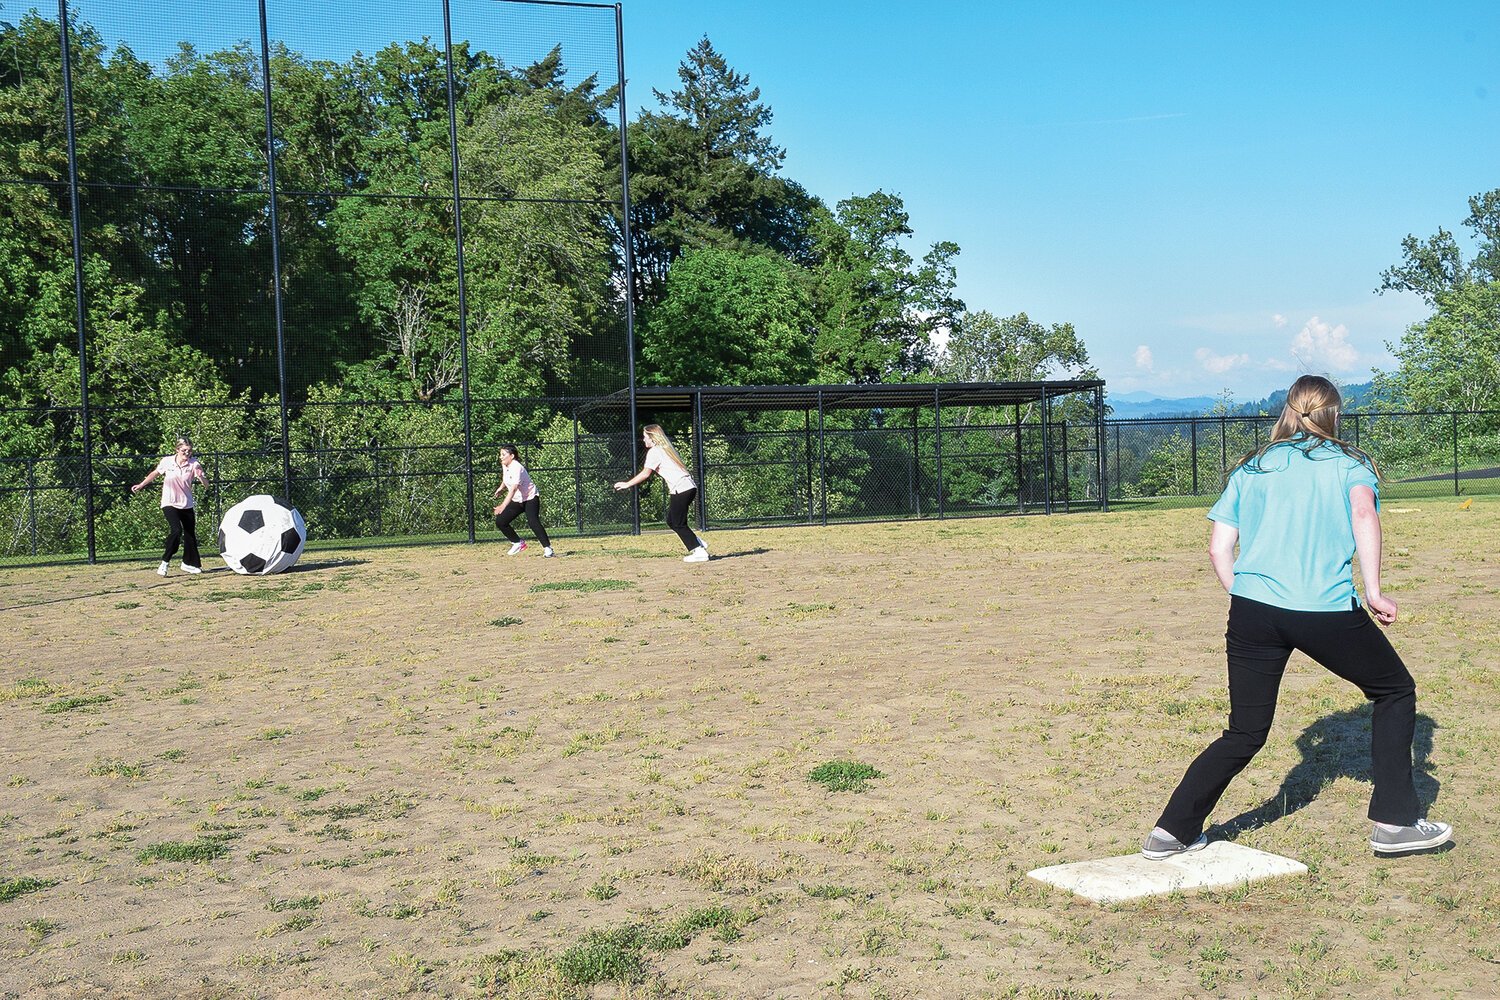 The Woodland Planters Days court plays a game of kickball at the in-progress softball and little league field during an open house at the park on May 18.